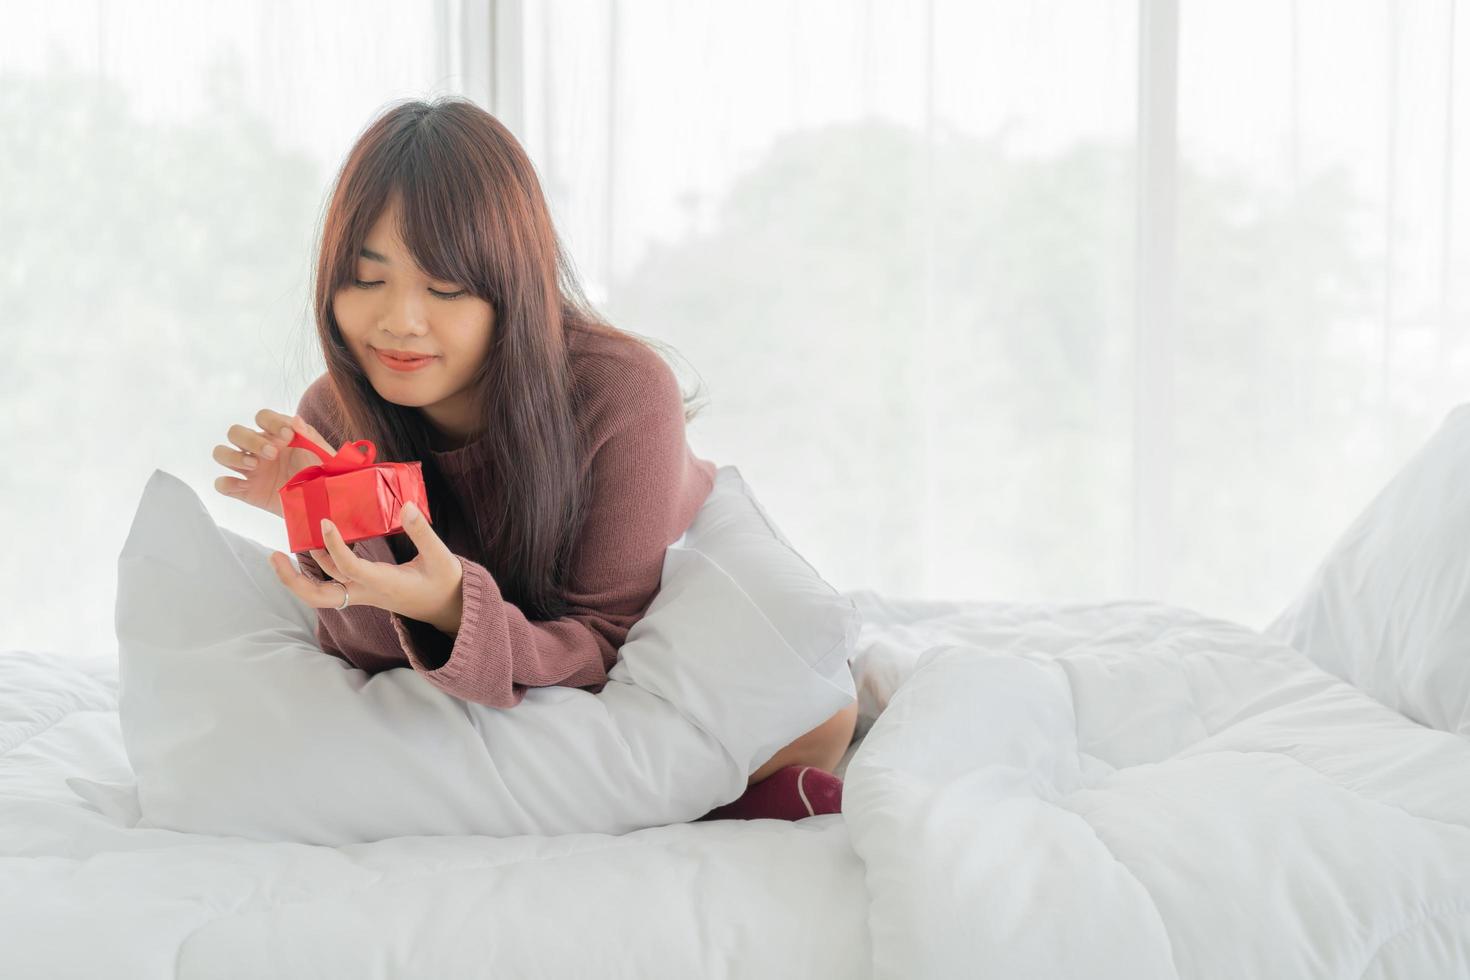 Asian woman happy to receive a gift box or present photo